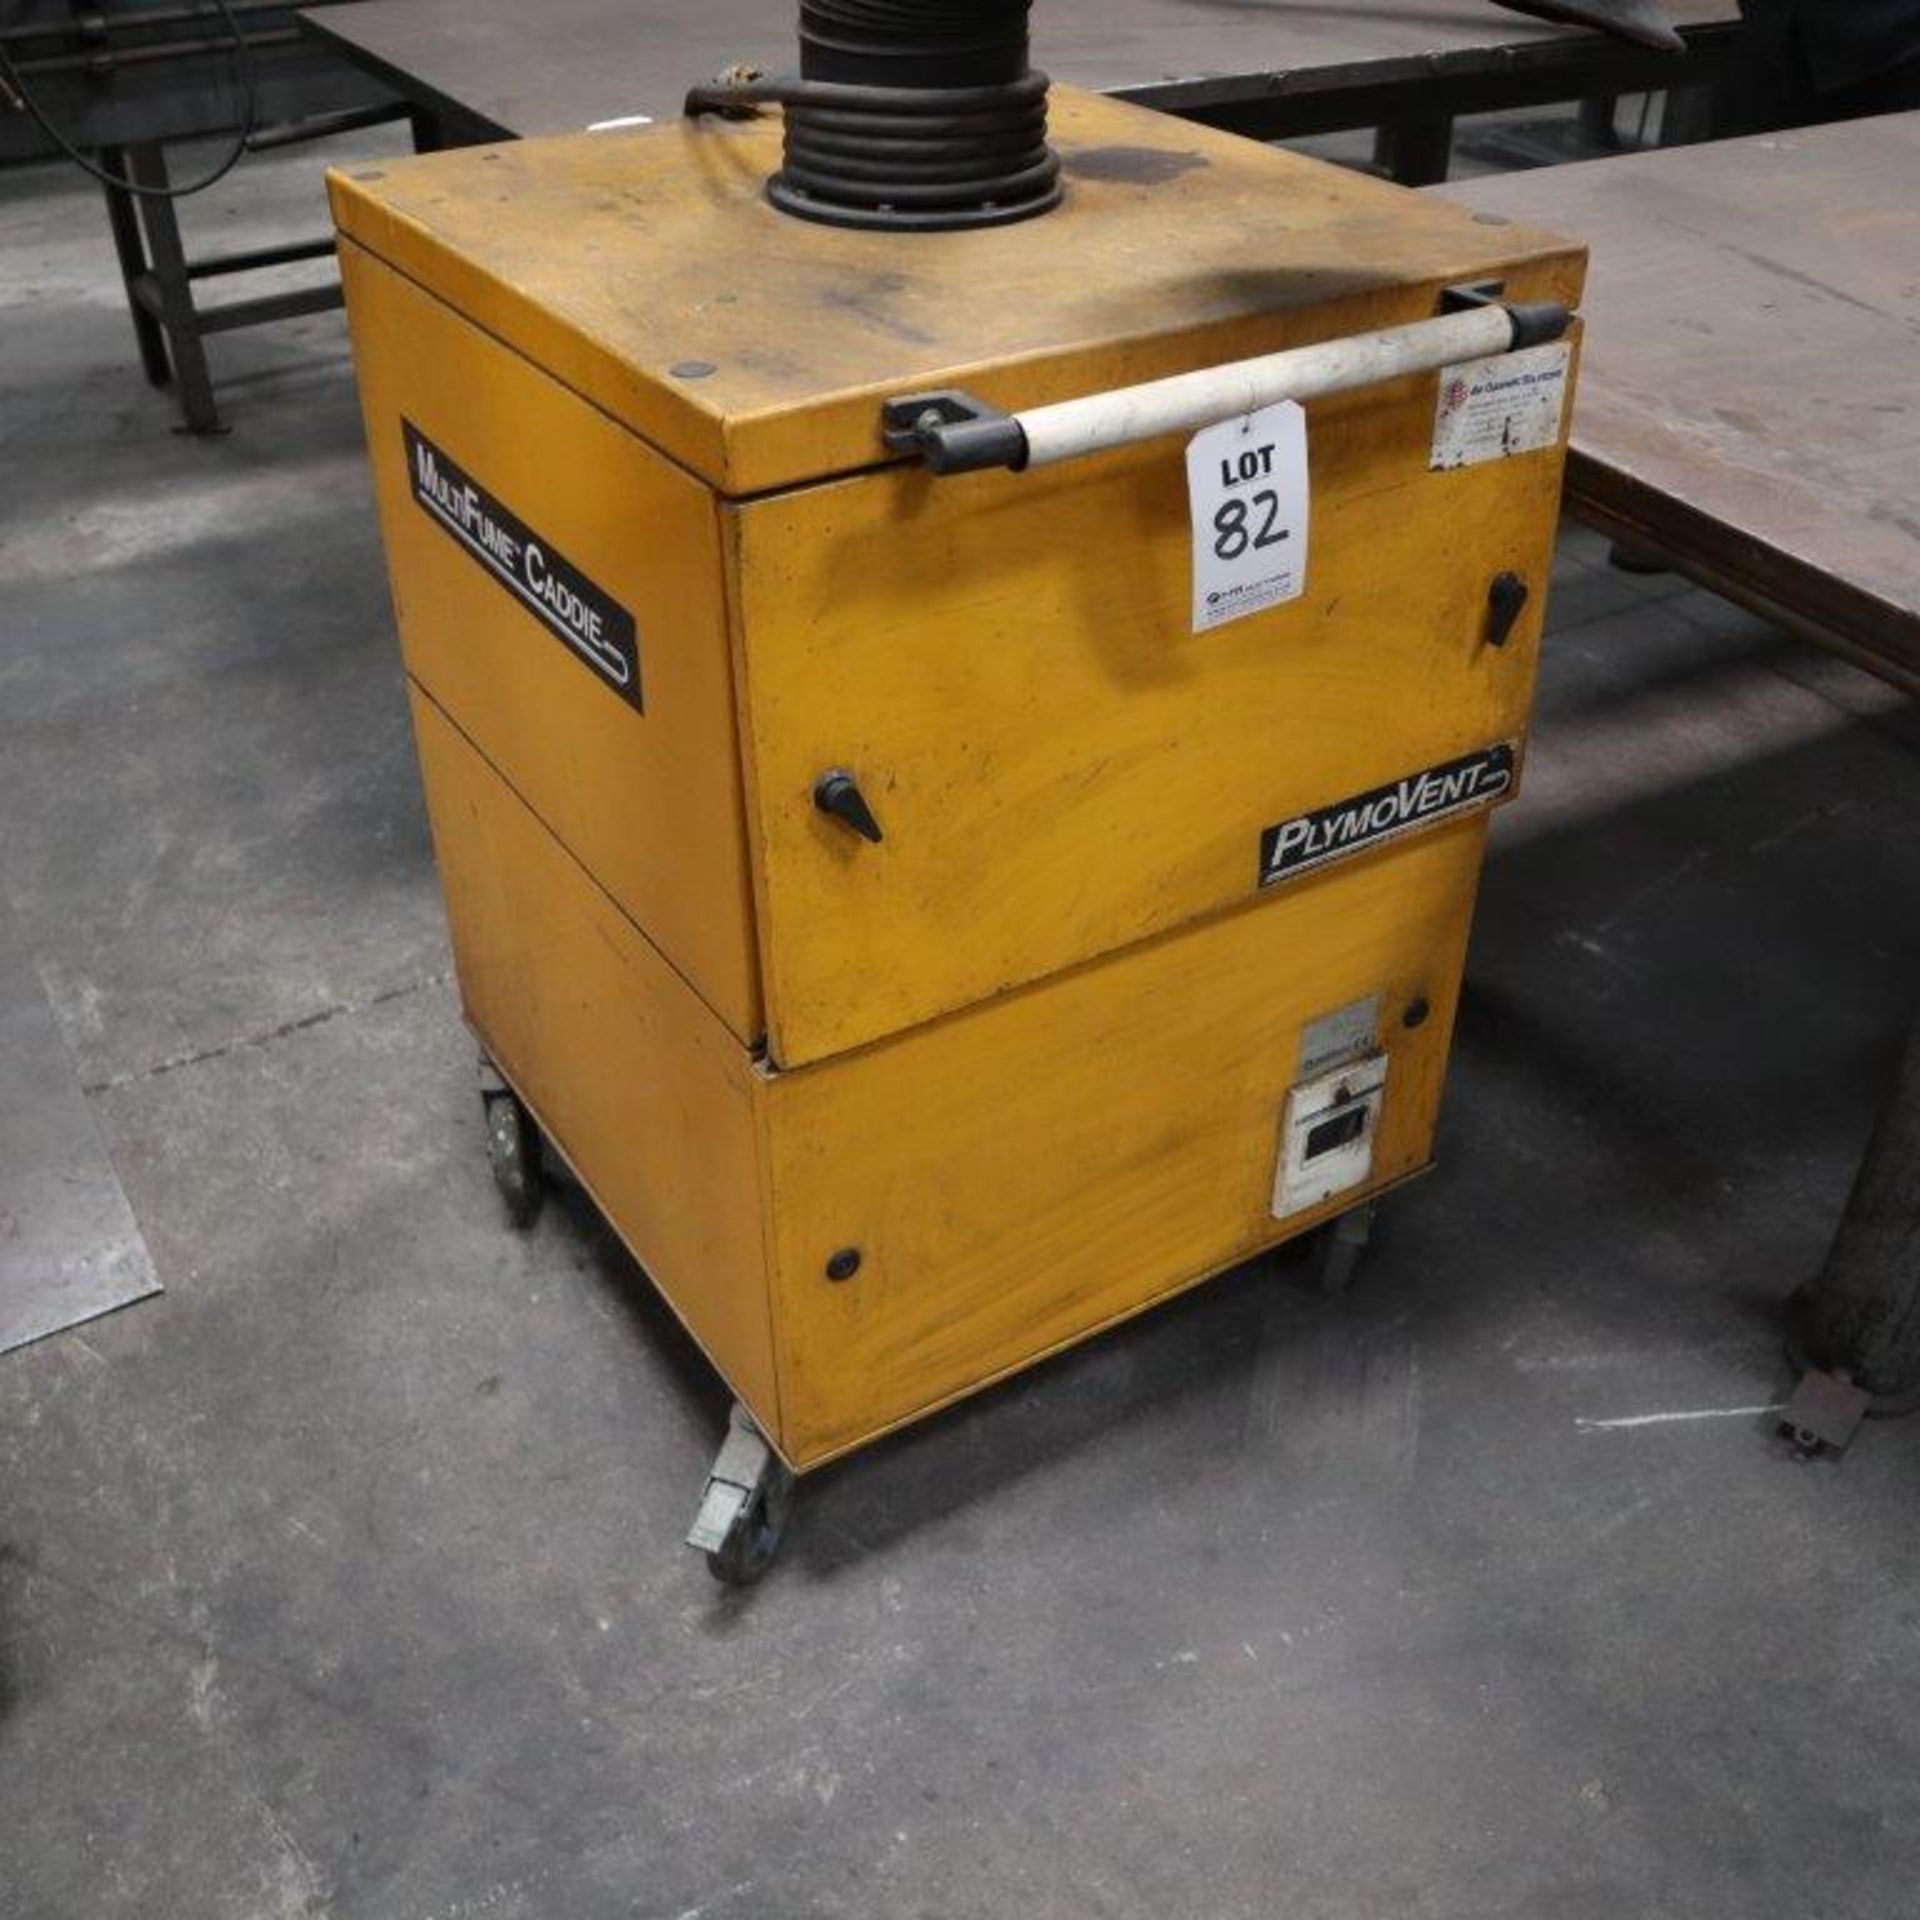 PLYMOVENT MULTIFUME CADDIE MODEL MFC-1200 WELDING FUME EXTRACTOR WITH EXTRACTION ARM - Image 2 of 3